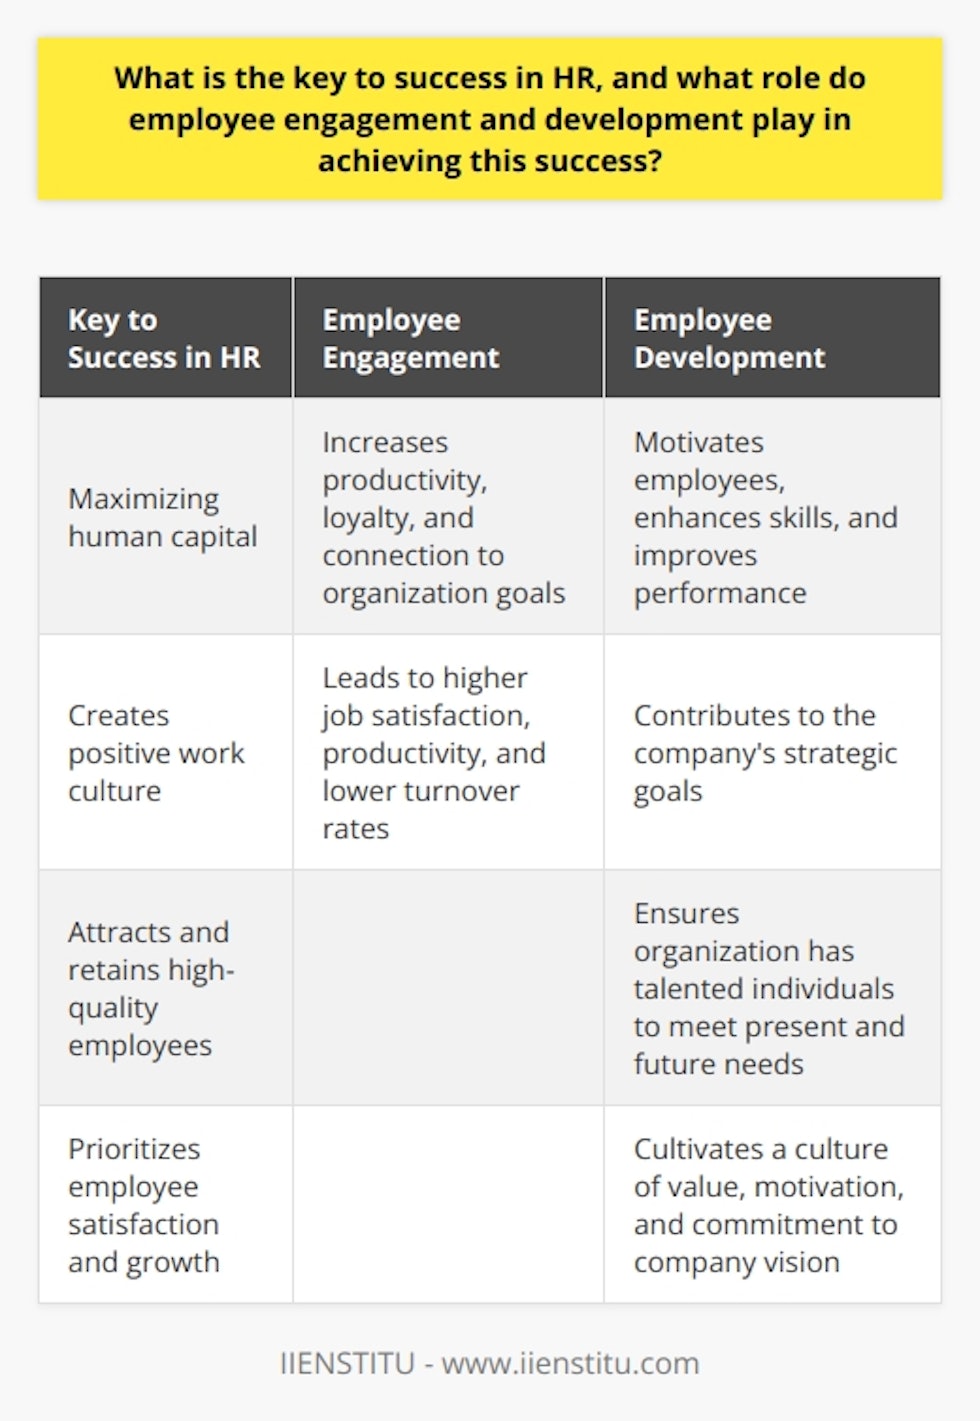 The key to success in HR is maximizing human capital by getting the best out of employees and ensuring their engagement and satisfaction. Employee engagement plays a crucial role in HR success as engaged employees are more productive, loyal, and connected to the organization's goals. Implementing an effective employee engagement strategy creates a positive work culture, leading to higher job satisfaction, productivity, and lower turnover rates. Additionally, employee development is significant in achieving HR success. Offering continuous learning and development opportunities motivates employees, enhances their skills, and improves their performance. A proficient workforce that is constantly growing and learning contributes to the company's strategic goals. Moreover, investing in employee development attracts and retains high-quality employees, ensuring the organization has talented individuals to meet its present and future needs. To summarize, employee engagement and development are not only about increasing productivity but also about creating a positive work environment. A successful HR strategy goes beyond driving individual performance and cultivates a culture where employees feel valued, motivated to grow, and committed to supporting the company's vision. Therefore, HR must prioritize employee engagement and development to achieve overall success.